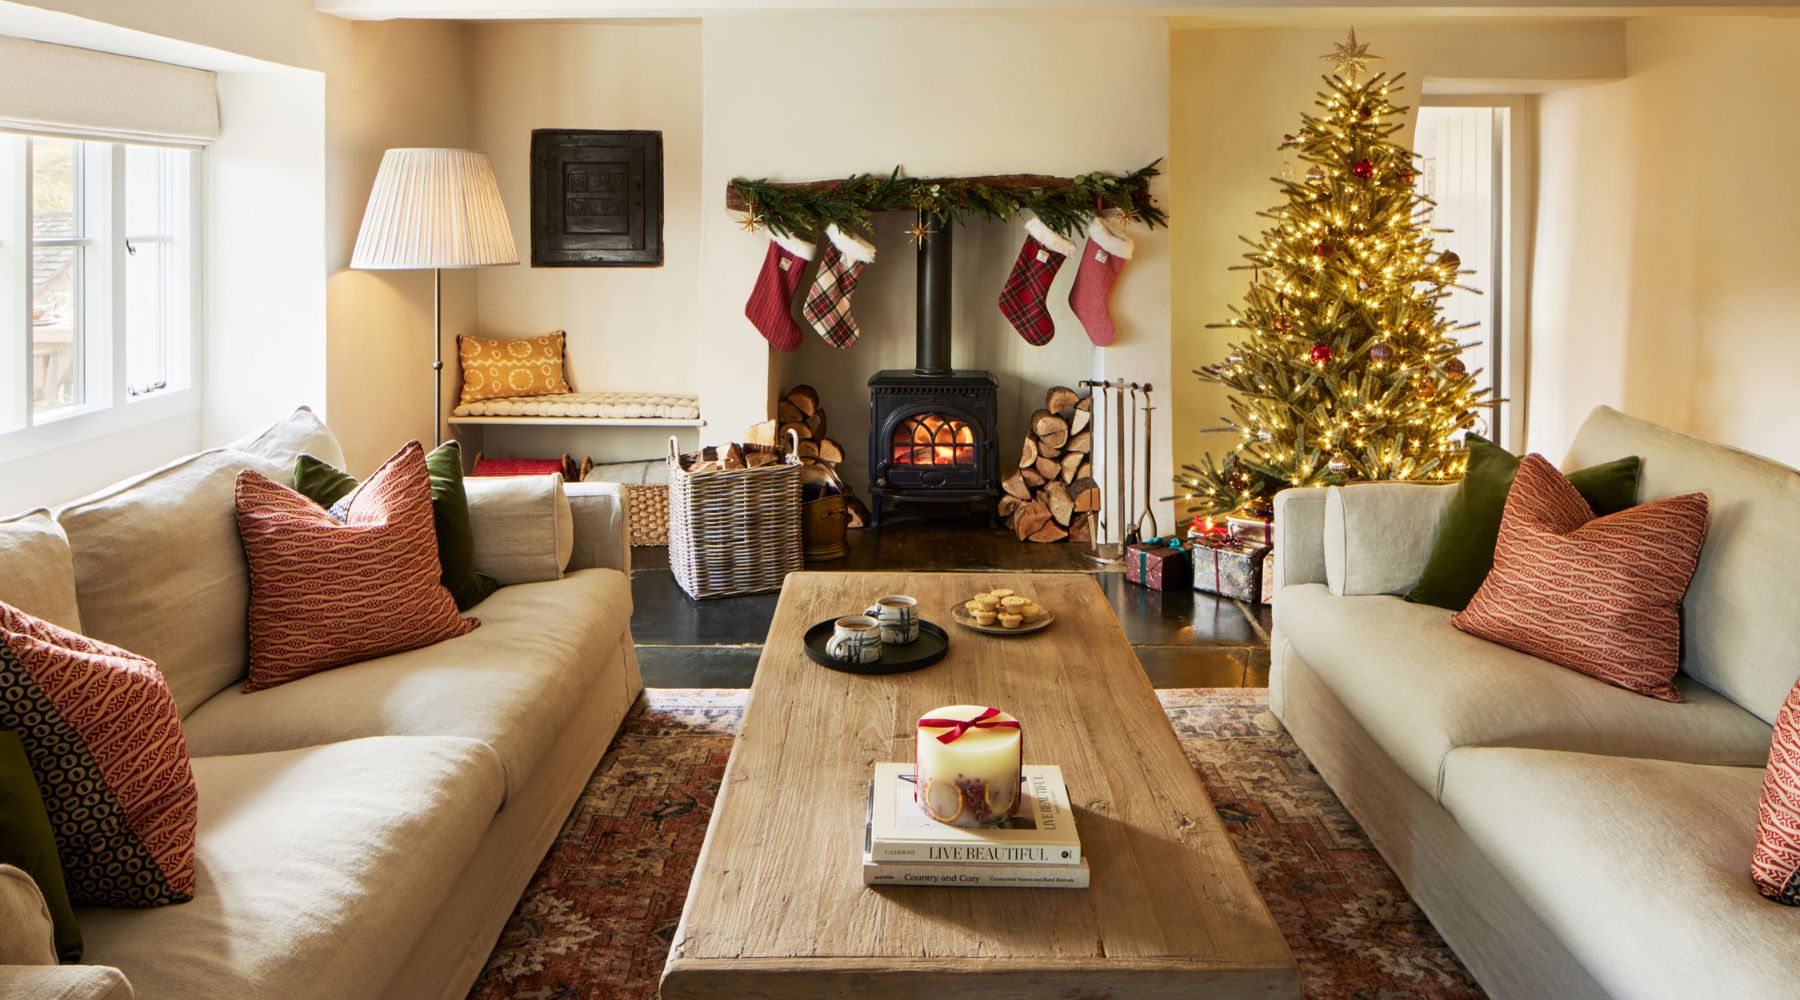 Omaze Million Pound House Lake District Cosy Lounge with log burner and Christmas tree and Christmas stockings hung around the fire